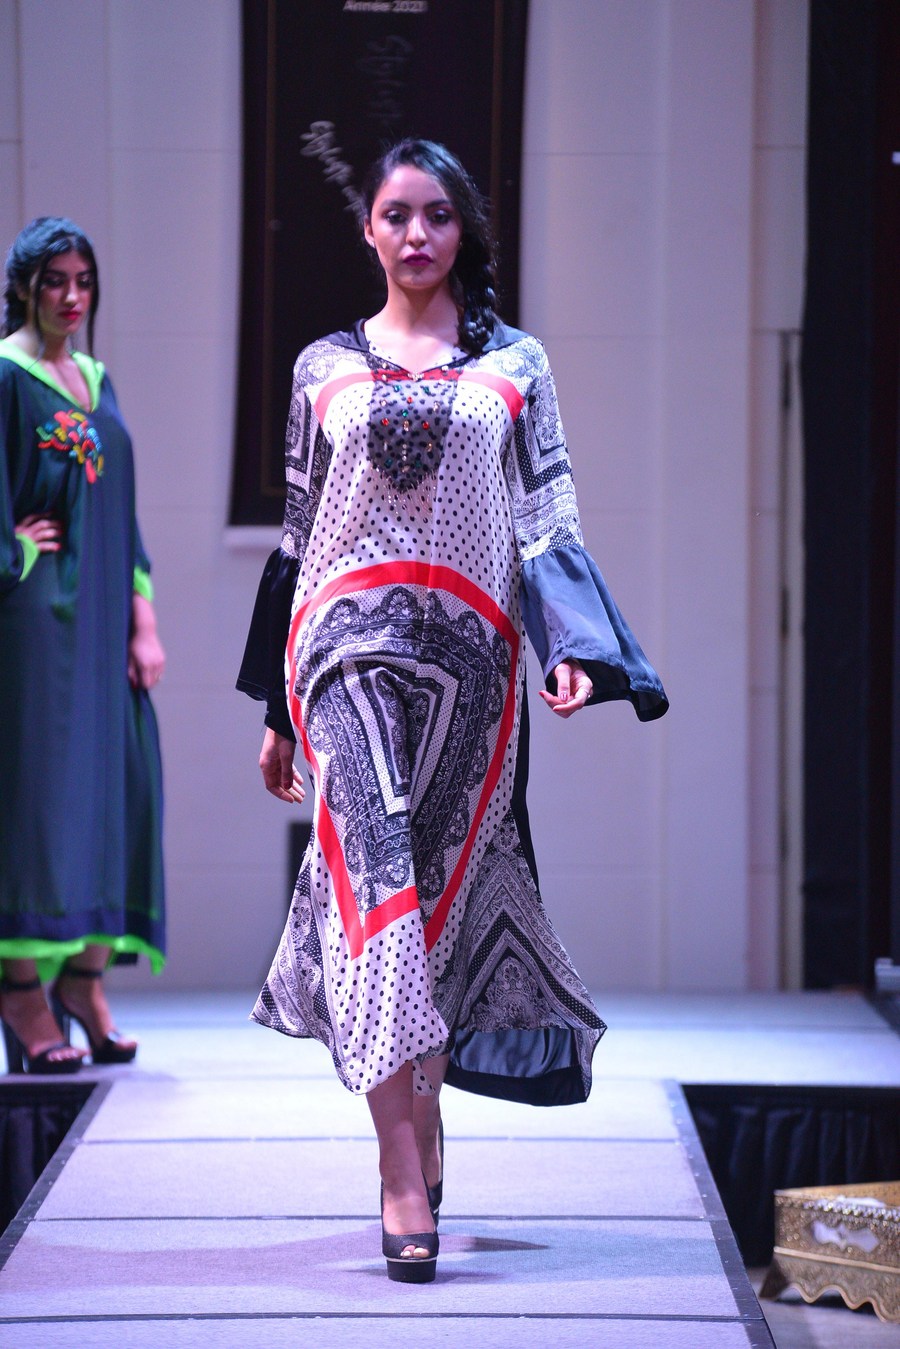 A fashion show of traditional Moroccan ...